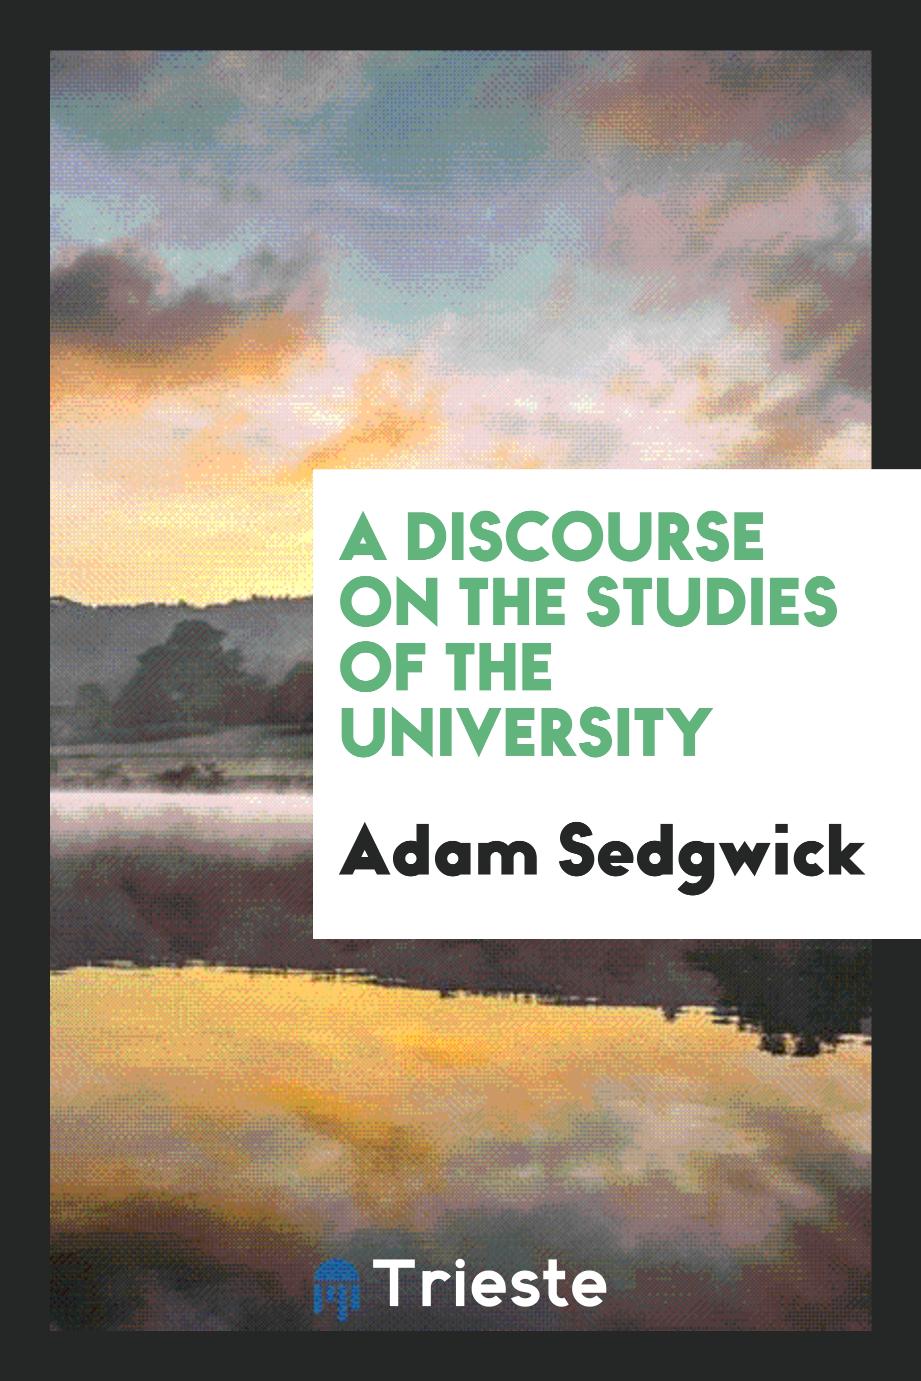 A Discourse on the Studies of the University